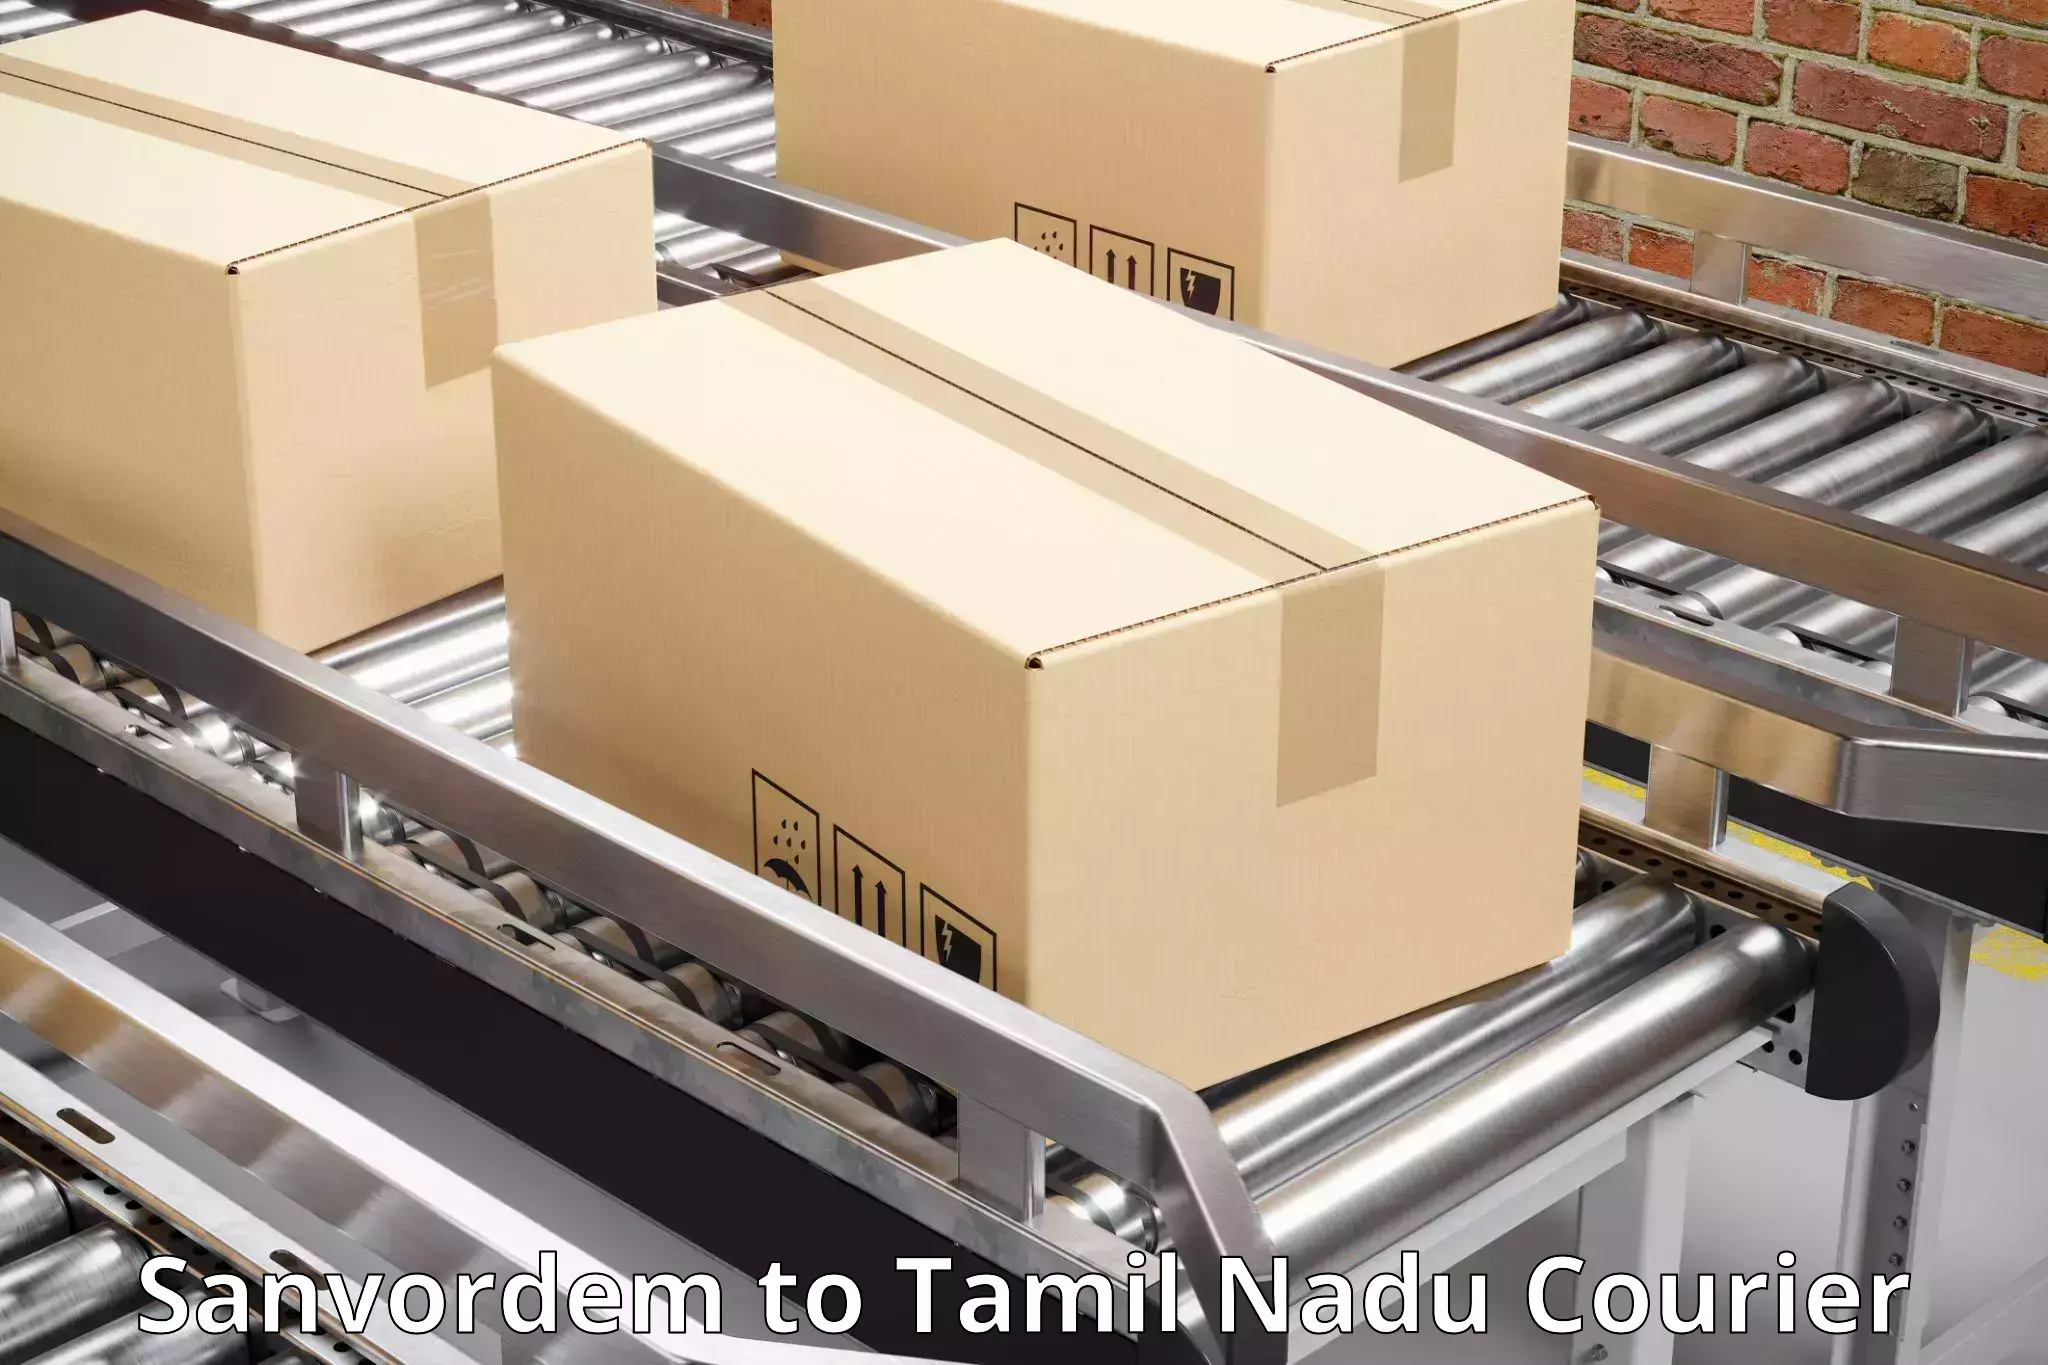 Reliable package handling Sanvordem to Chennai Port